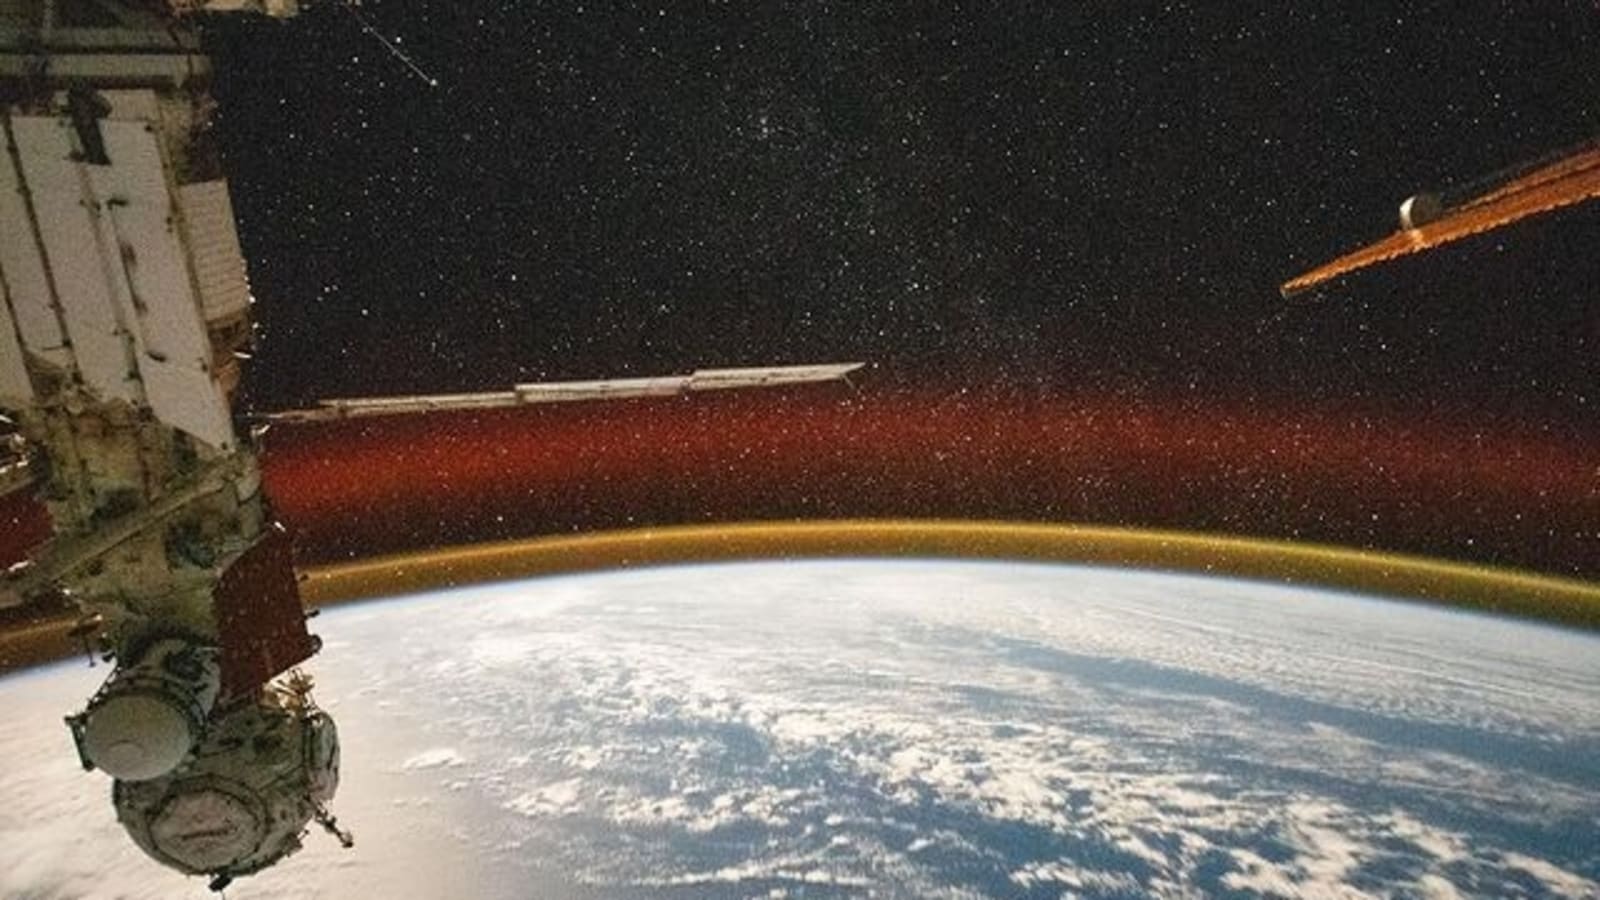 ISS shares never-seen-before pic of Earth against a ‘starry sky’